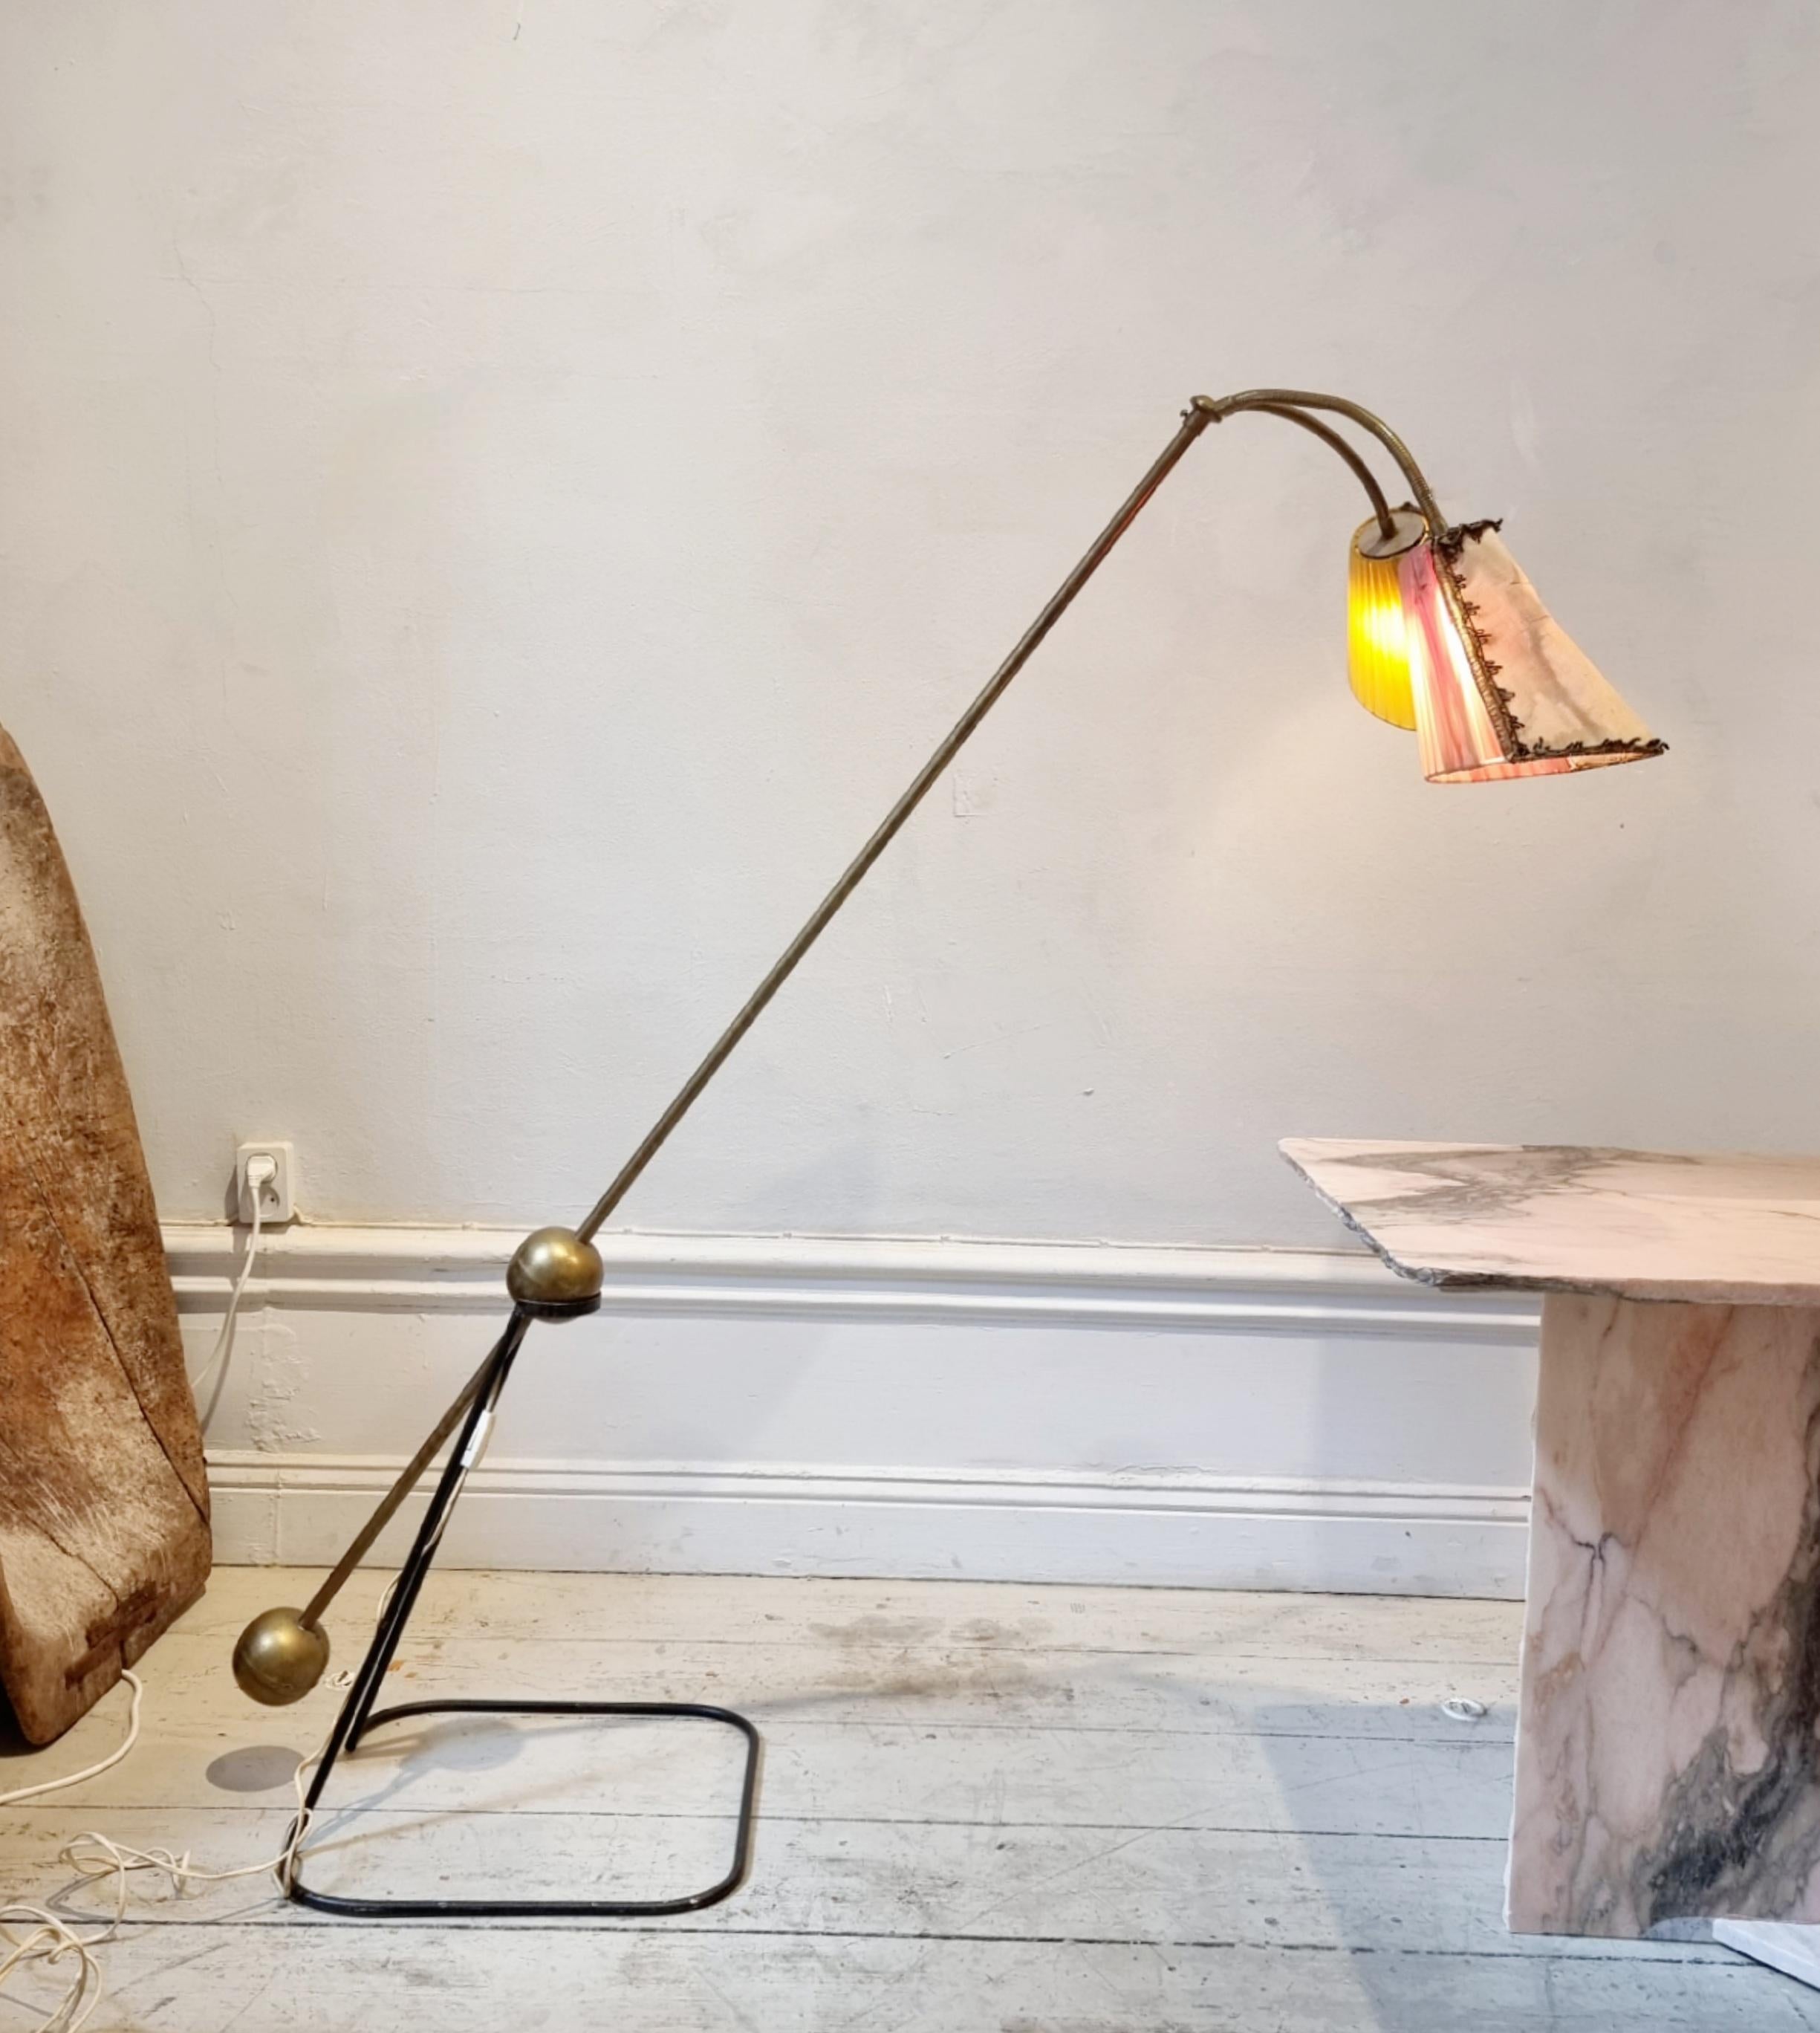 Rare floor lamp in the style of Pierre Guariche. Marked L.M. likely Luci Milano. Italian midcentury. 

With original shades, which can easily be updated with new fabric. The counterpart makes it easy to change the height and direction of the light.